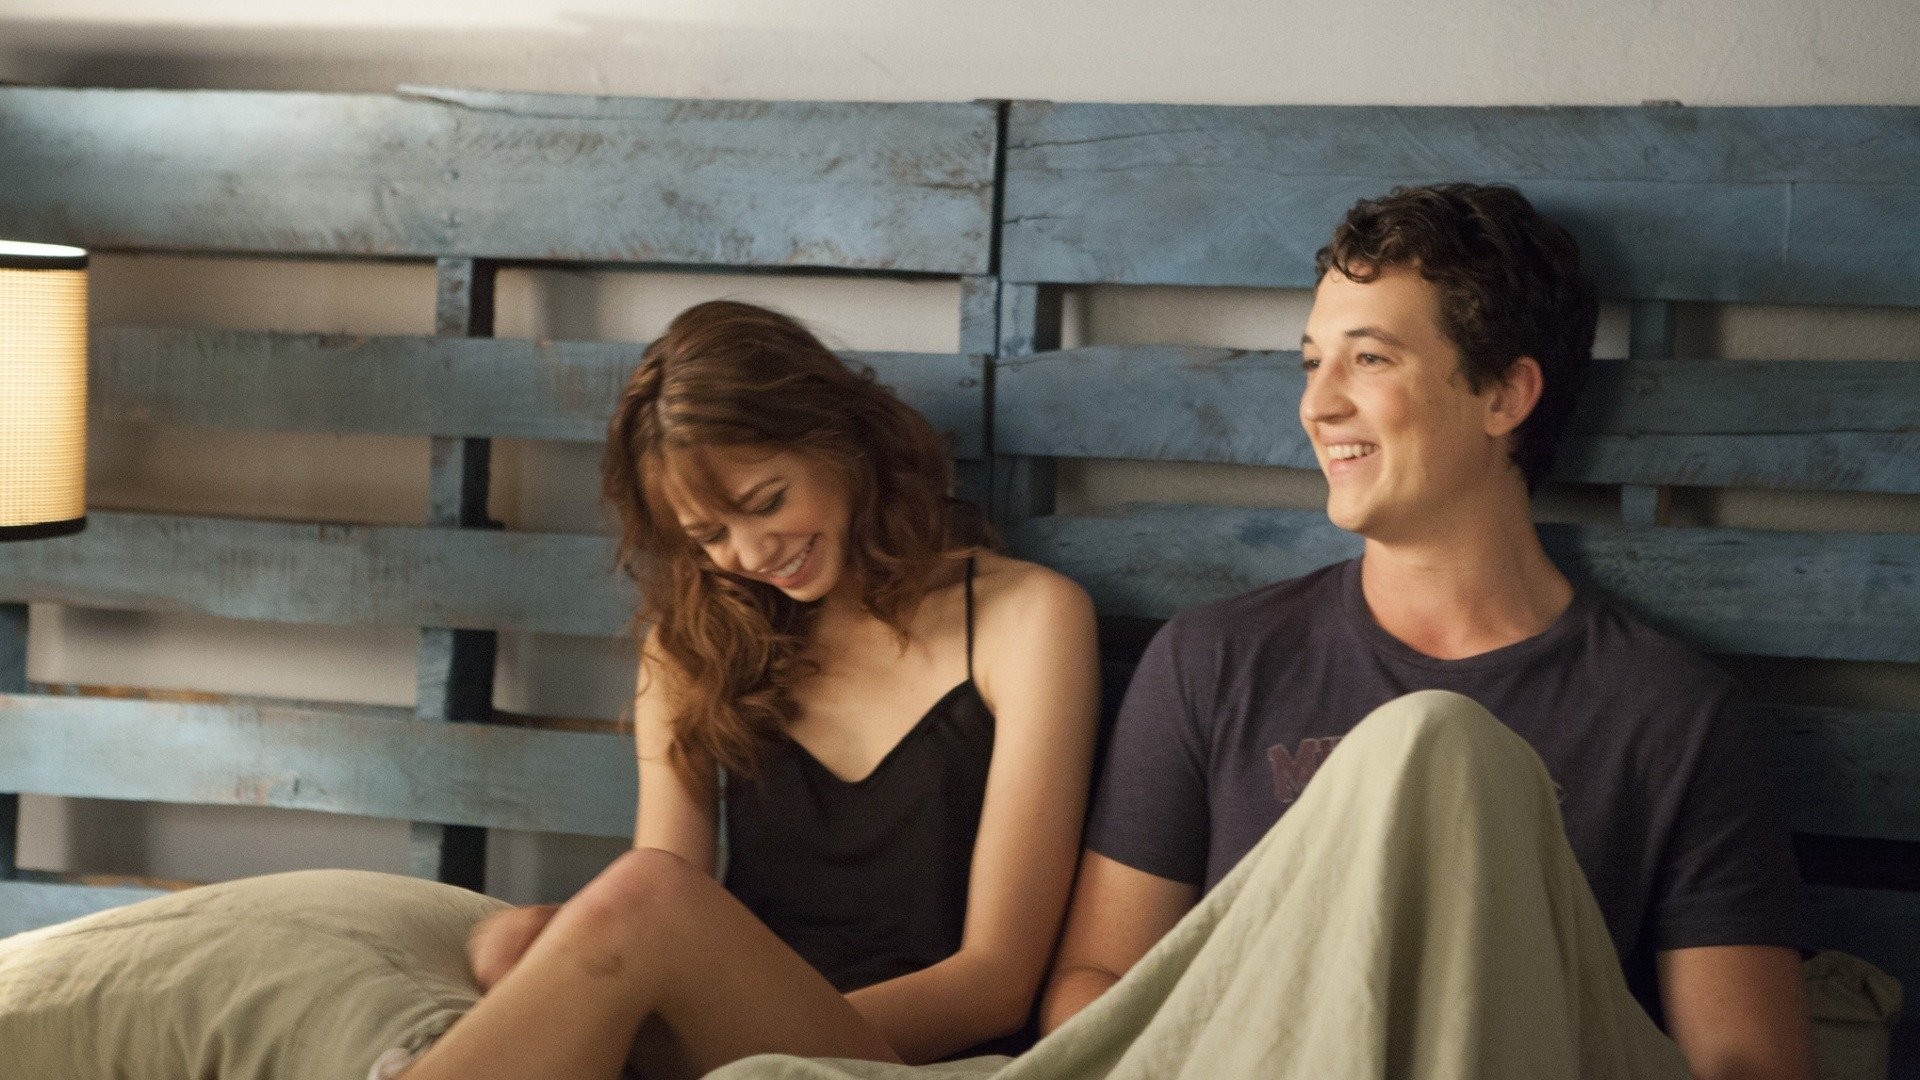 Two Night Stand - Rotten Tomatoes